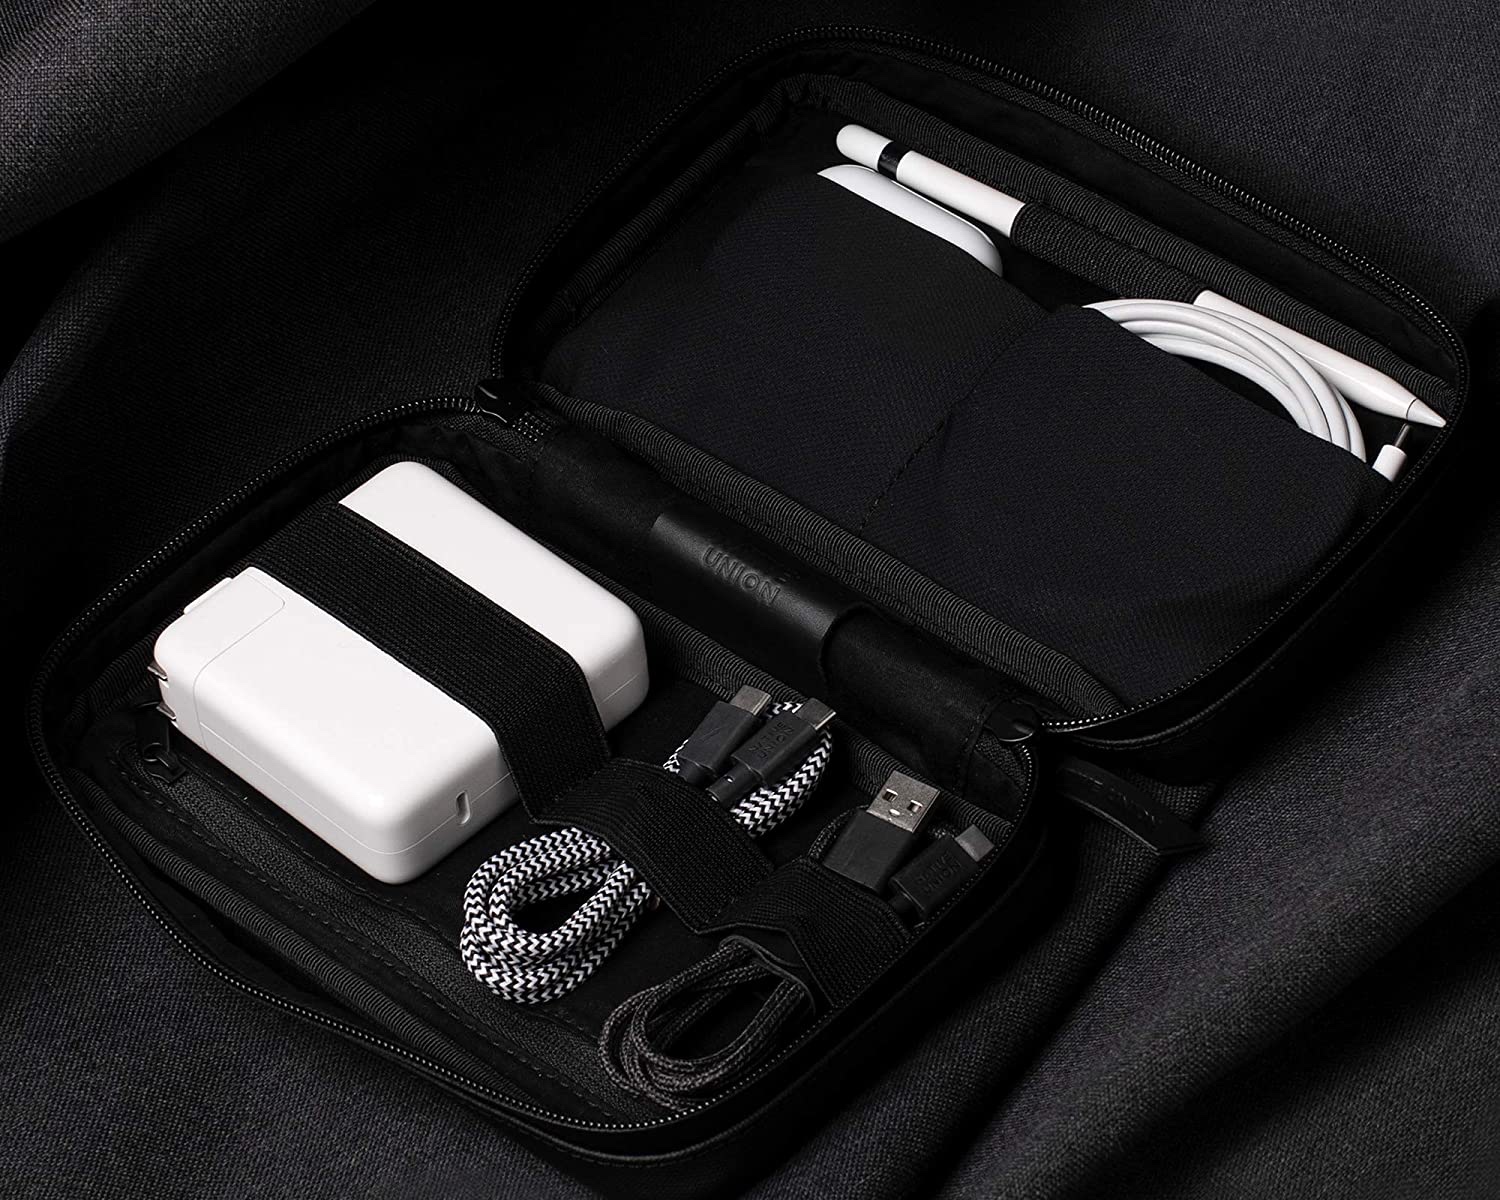 DDgro Hard Electronics Organizer Travel Case，Portable Hard Drive Pouch Bag  for Apple MacBook Charger, Power Cords, Cable, Tech Accessories, Shockproof